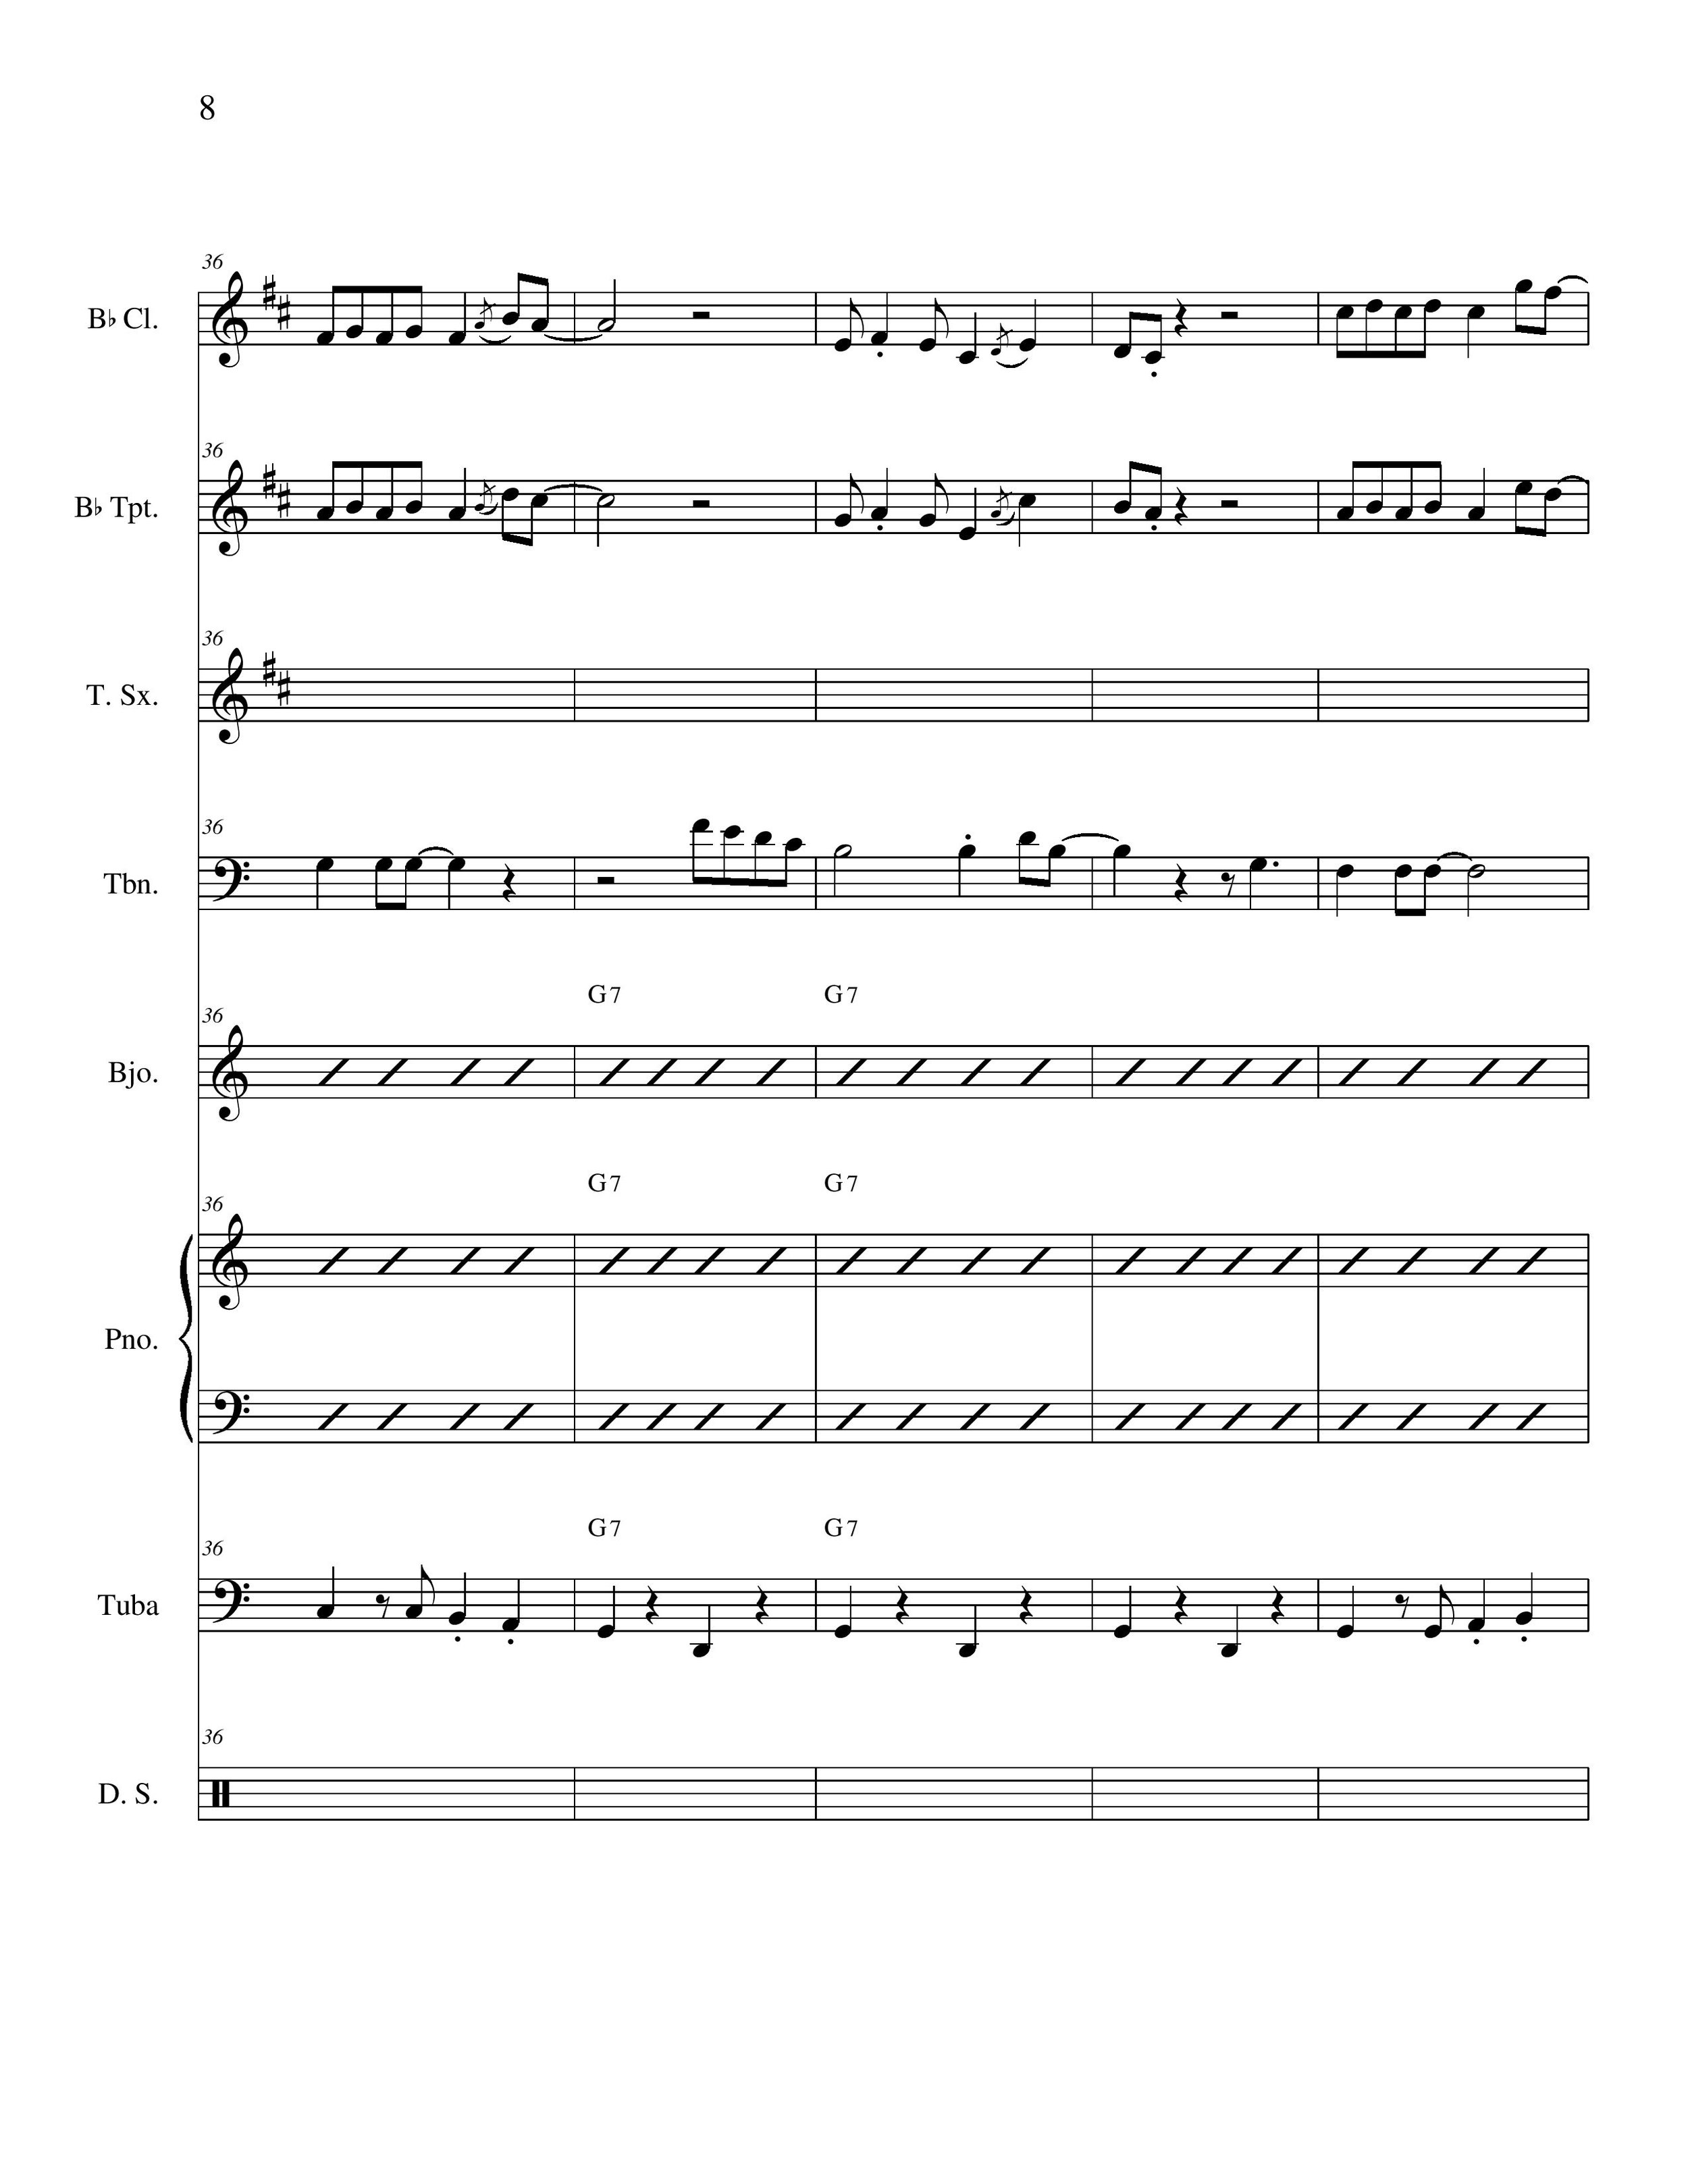 Rudolph the Red-Nosed Reindeer - Score_08.jpg